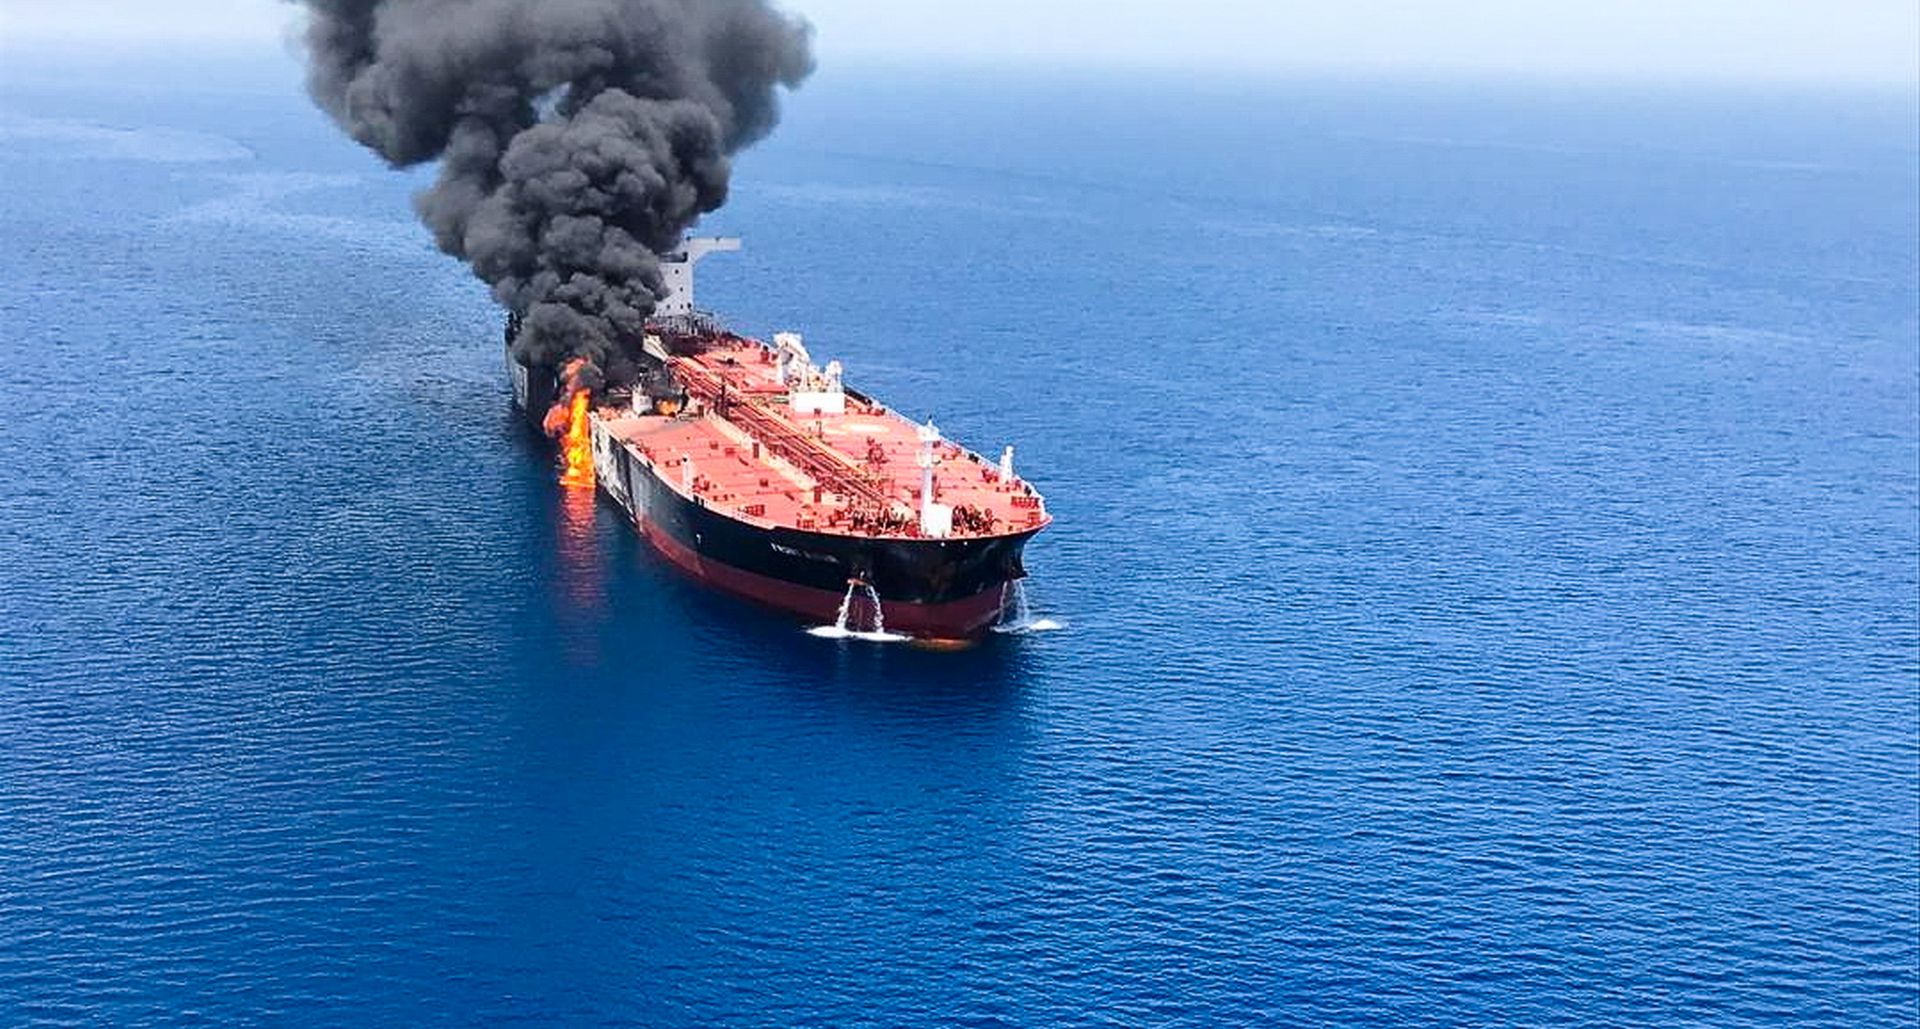 epa07645394 The crude oil tanker Front Altair on fire in the Gulf of Oman, 13 June 2019. According to the Norwegian Maritime Authority, the Front Altair is currently on fire in the Gulf of Oman after allegedly being attacked and in the early morning of 13 June between the UAE and Iran.  EPA/STRINGER